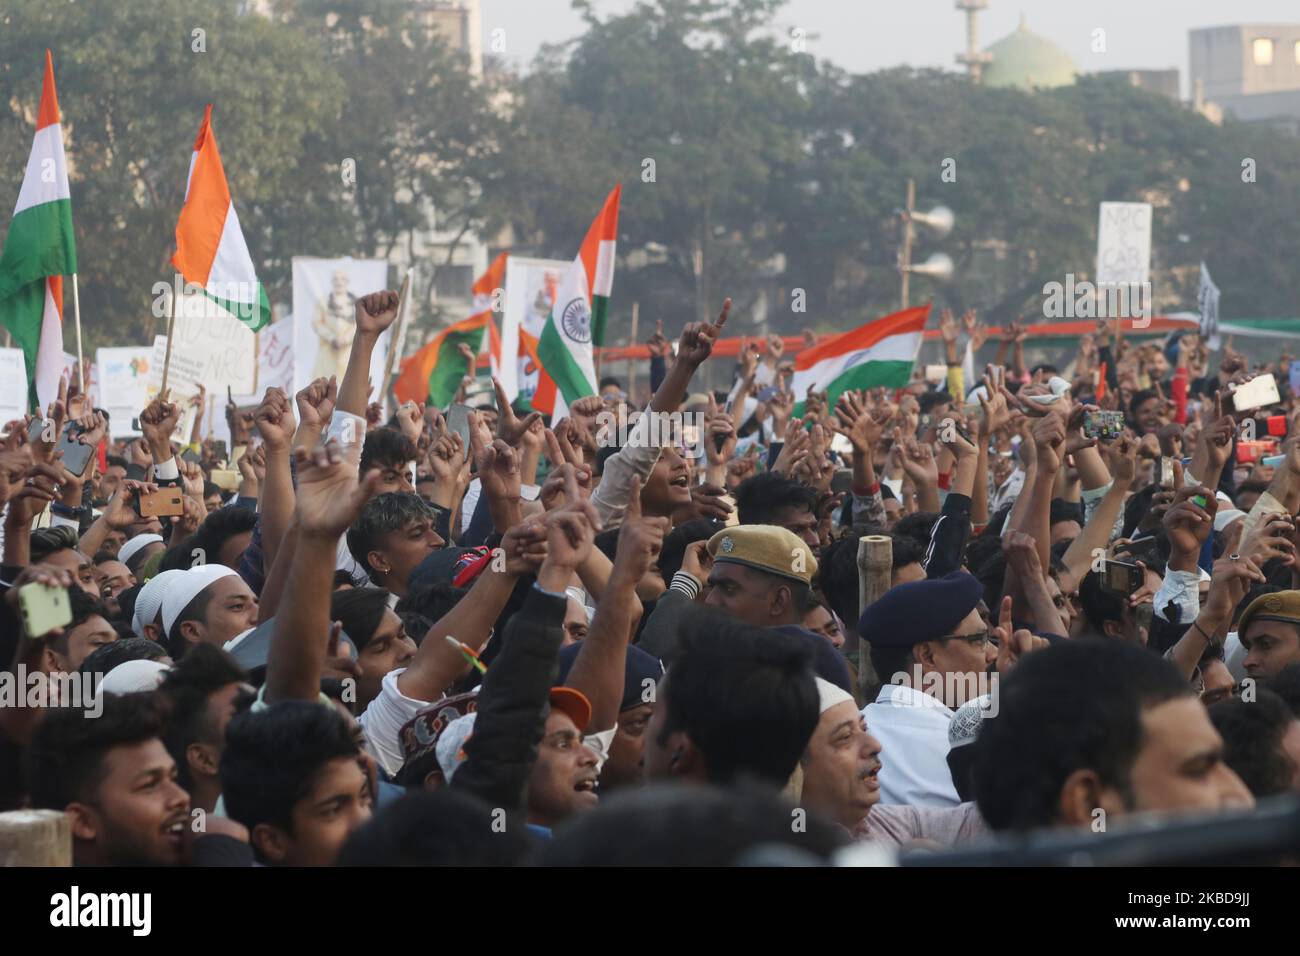 Chief minister of West Bengal state and Supremo of the Trinamool Congress (TMC) Political Party Mamata Banerjee (C) address (Not in the Pictures ) and Protestors part in the rally during a rally demanding the withdrawal of the Citizenship Amendment Act and National Register of Citizens (NRC) in Kolkata, India, Friday, Dec. 20, 2019. (Photo by Debajyoti Chakraborty/NurPhoto) Stock Photo